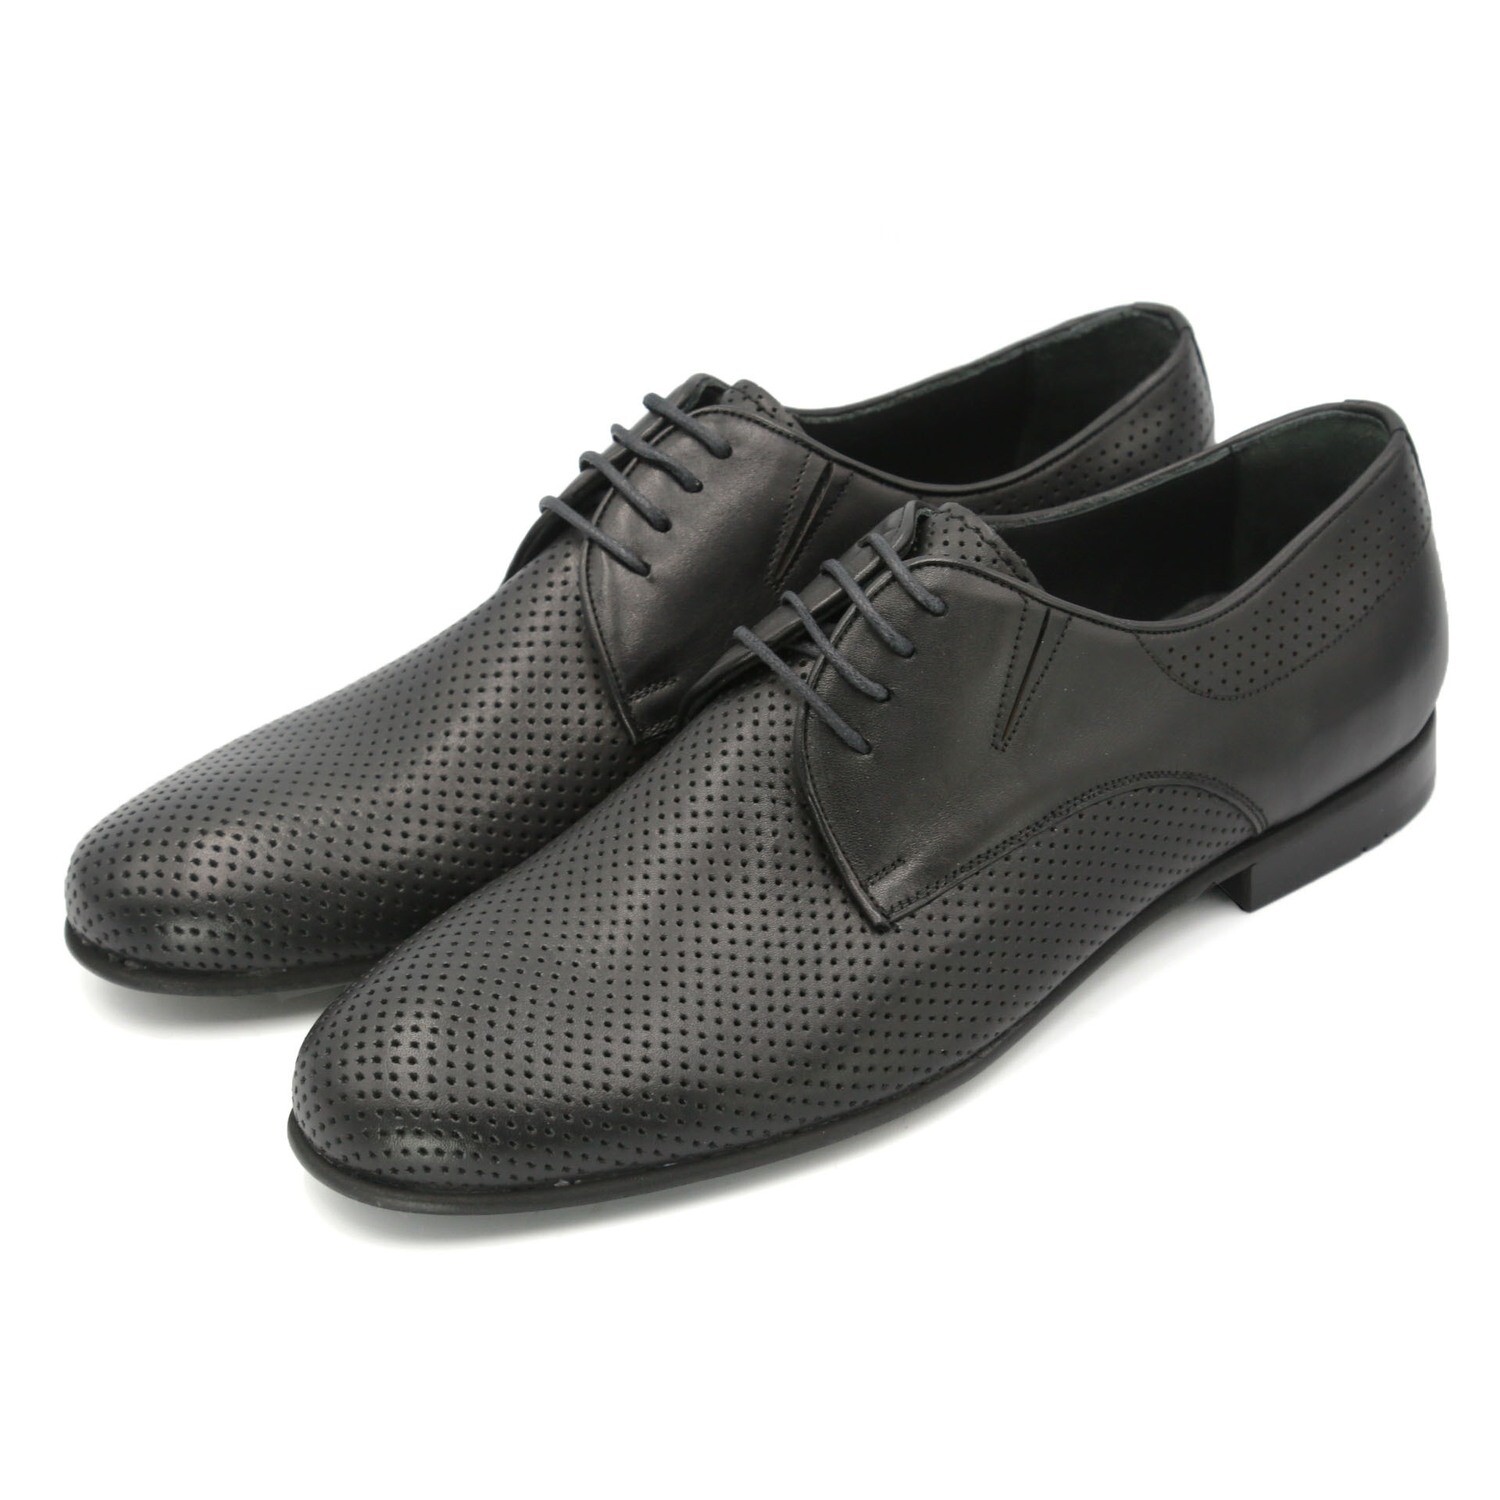 100% pure leather formal shoes for men